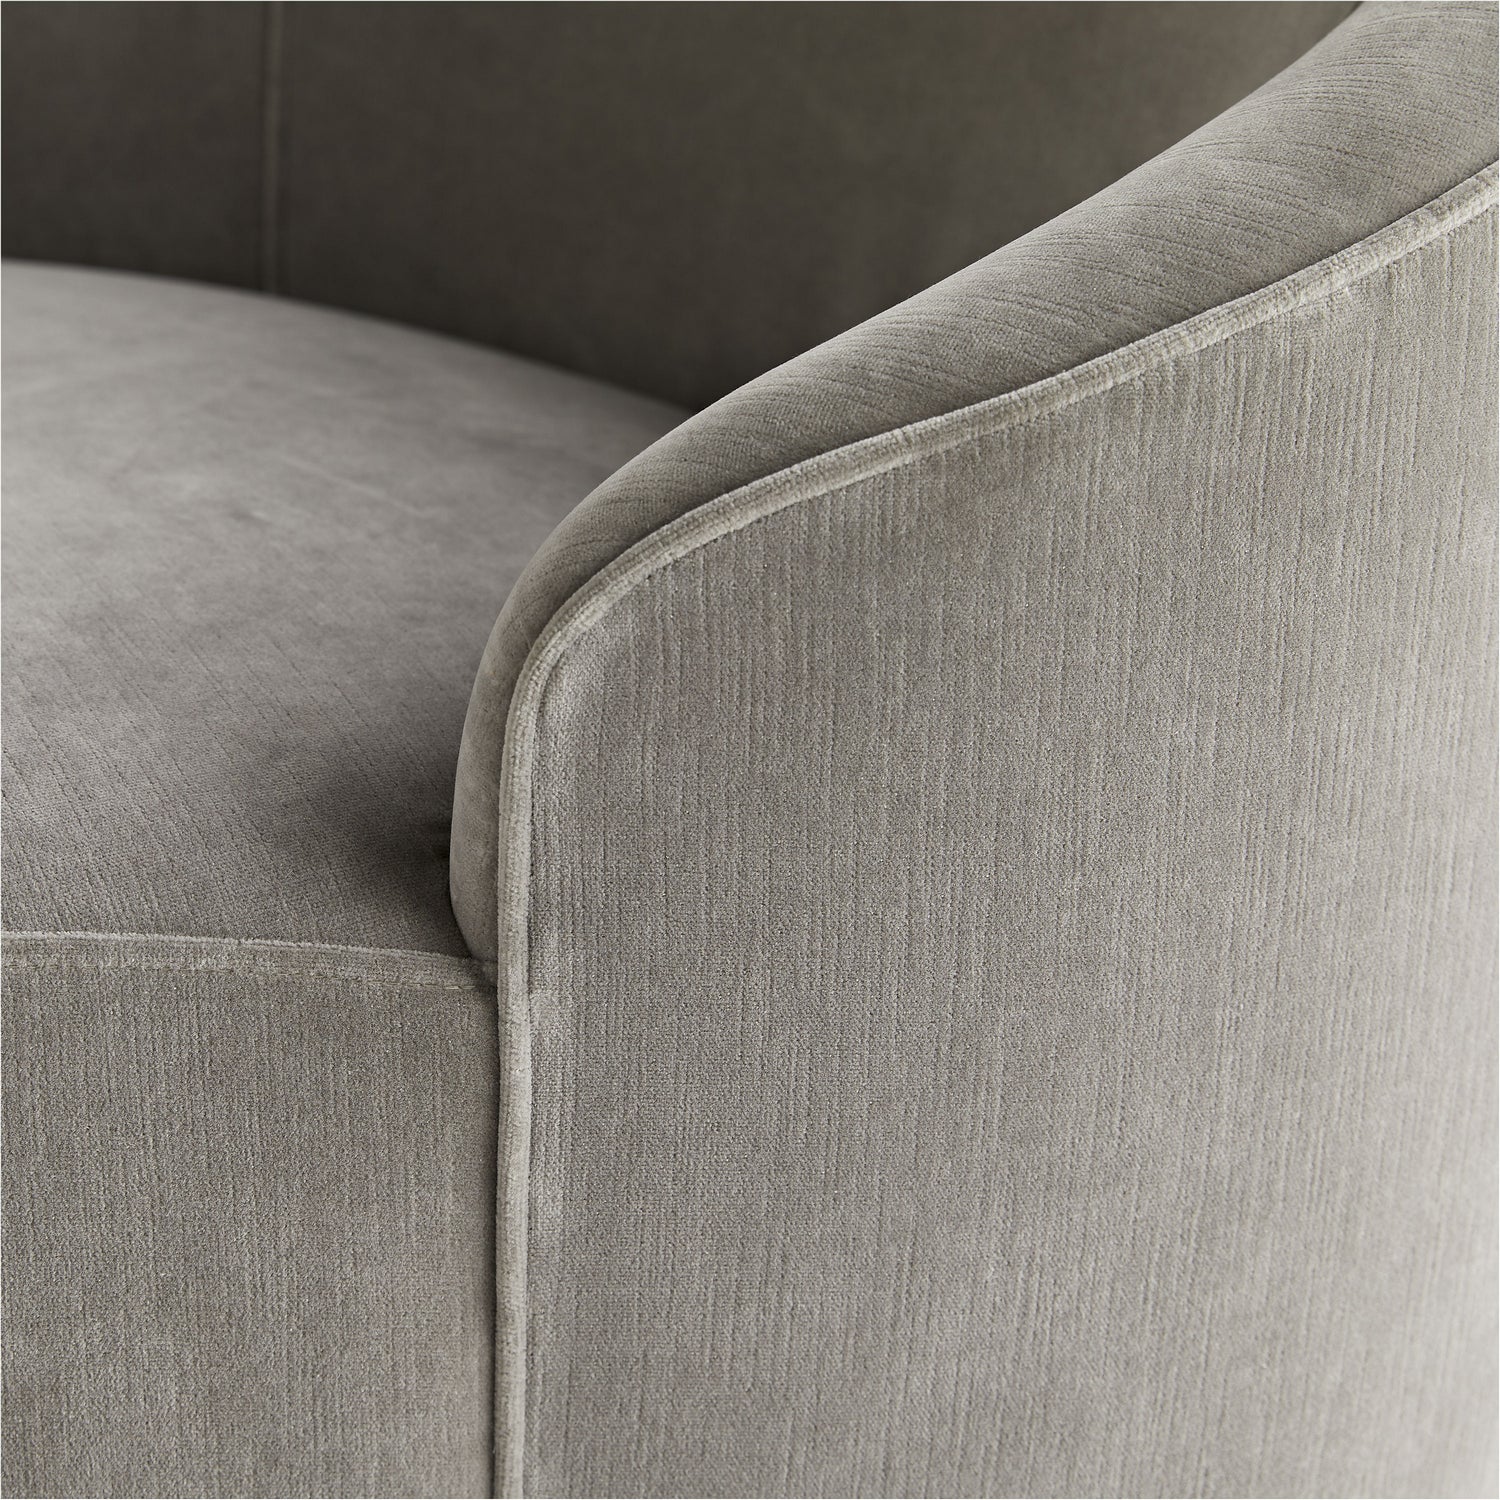 Chaise from the Tuner collection in Sharkskin finish